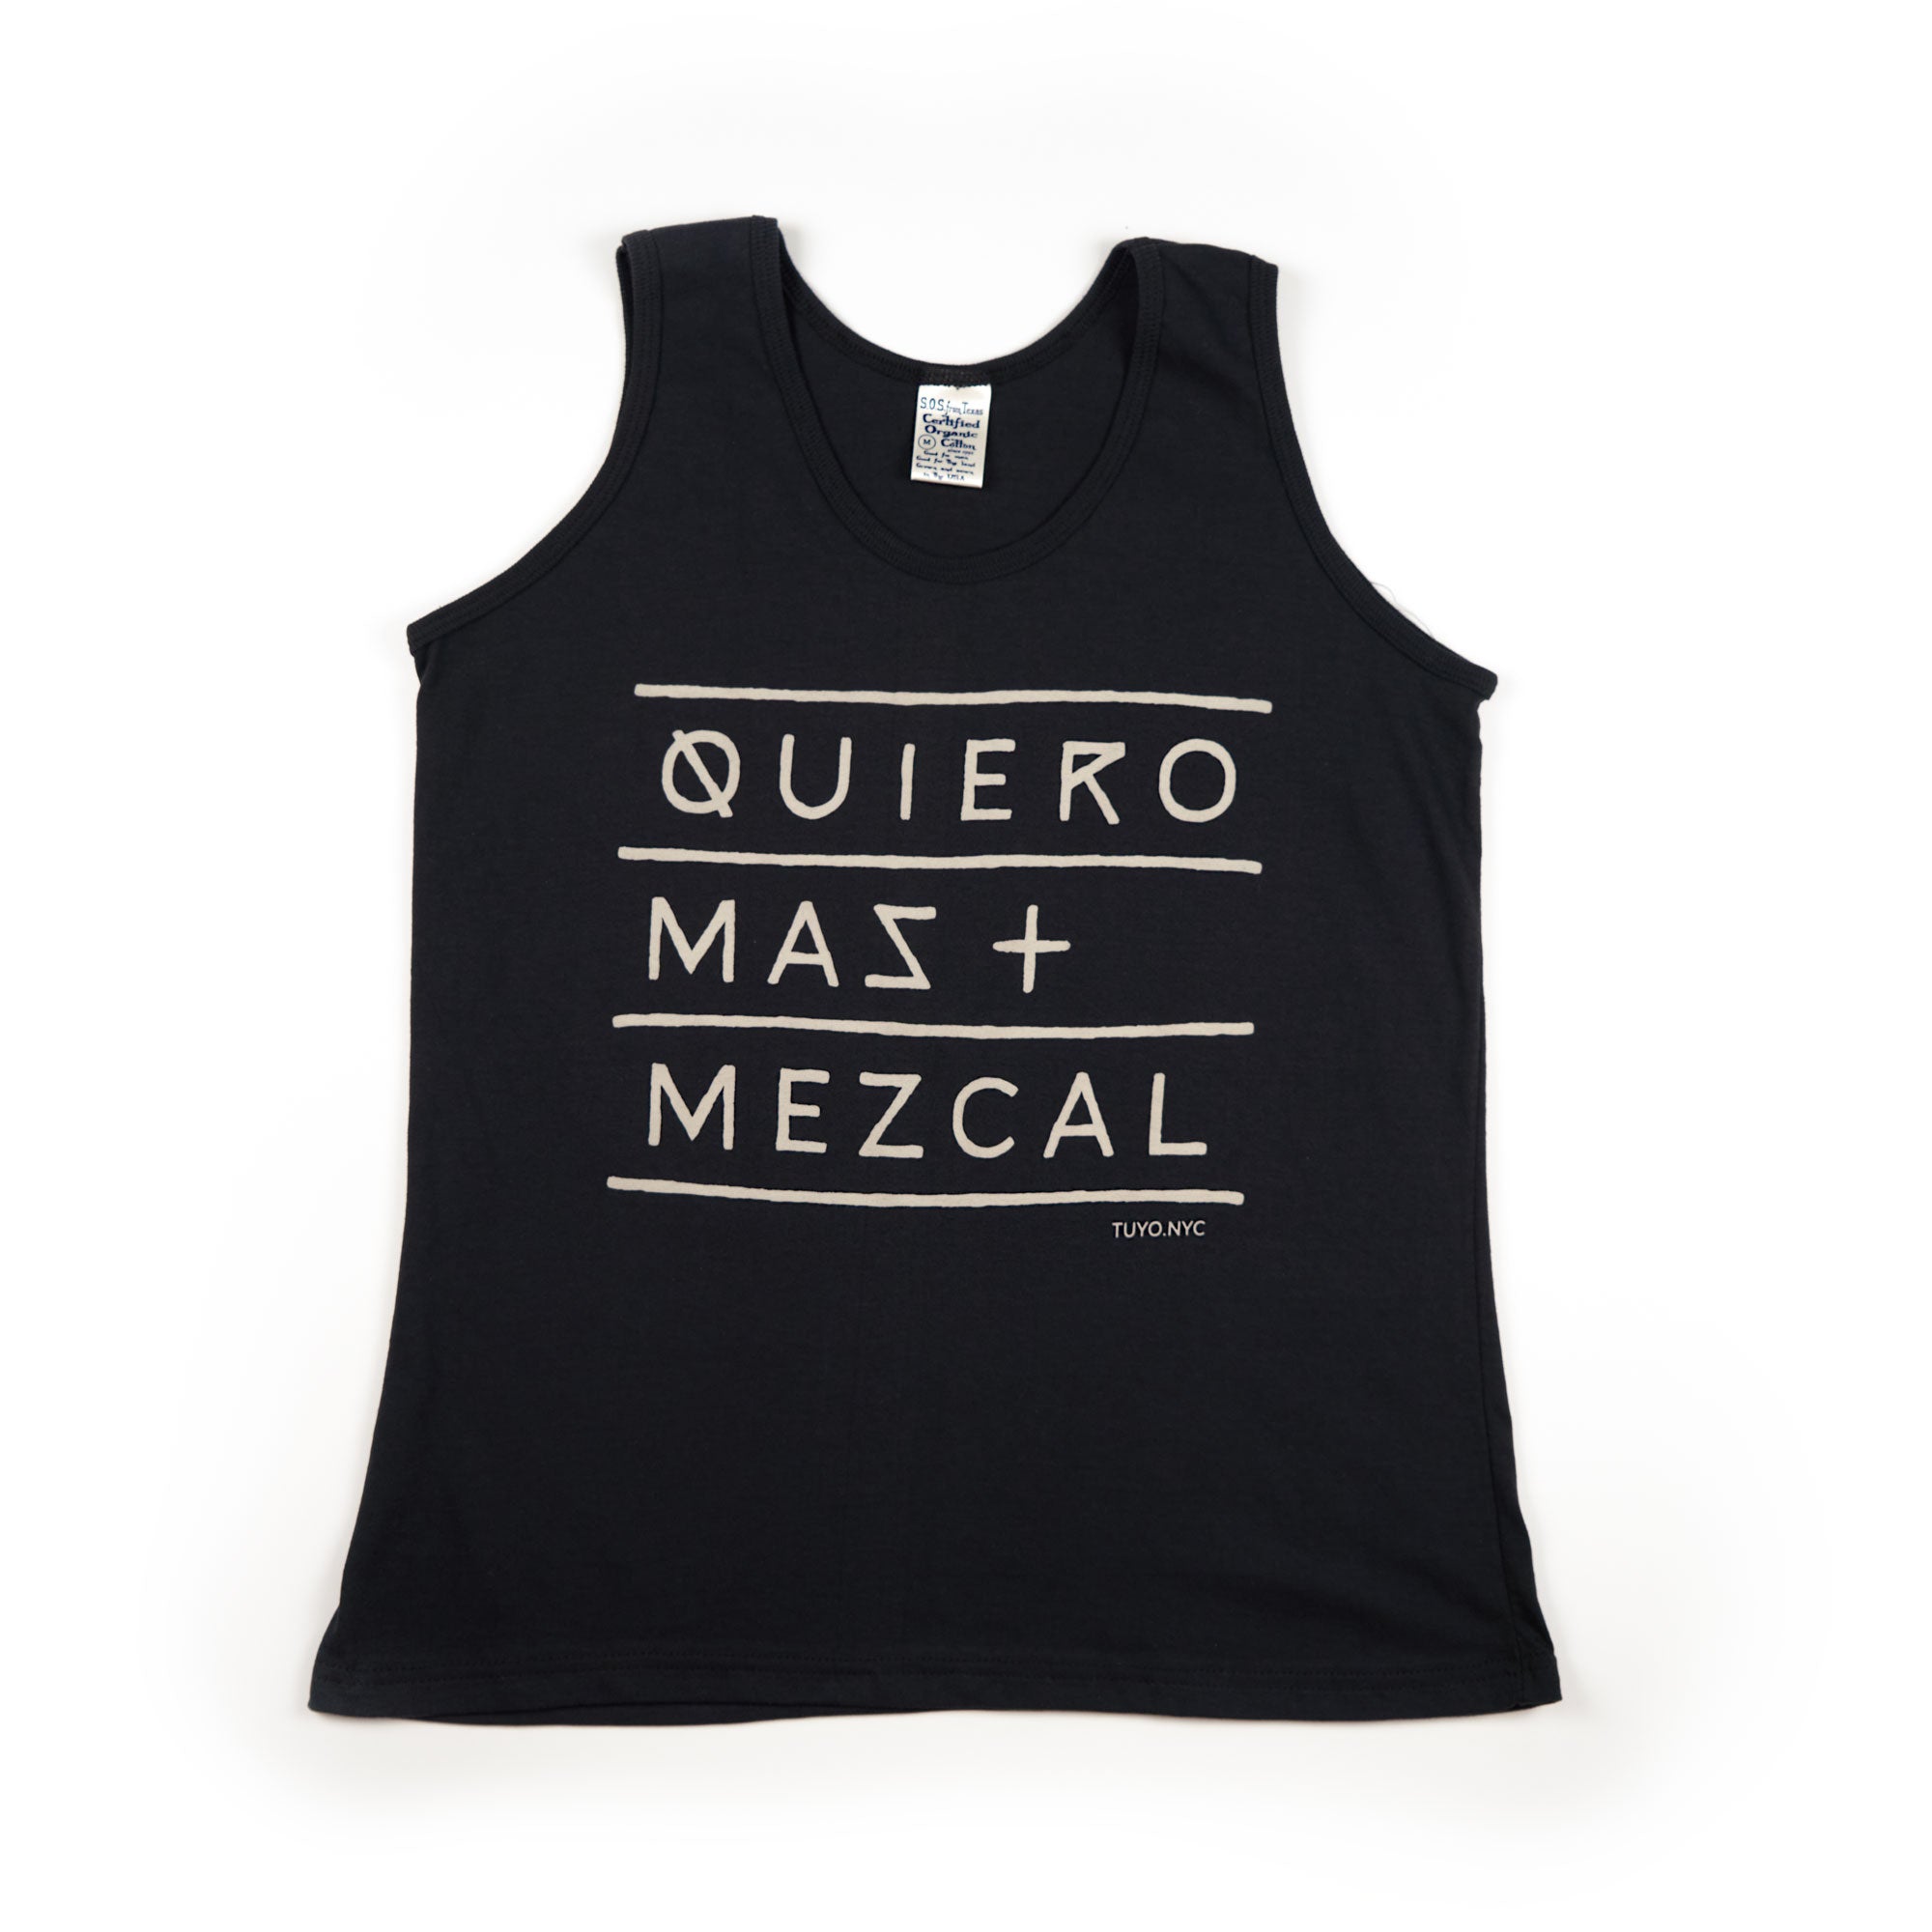 Organic cotton ladies tank with the words “quiero mas mezcal” printed on the front